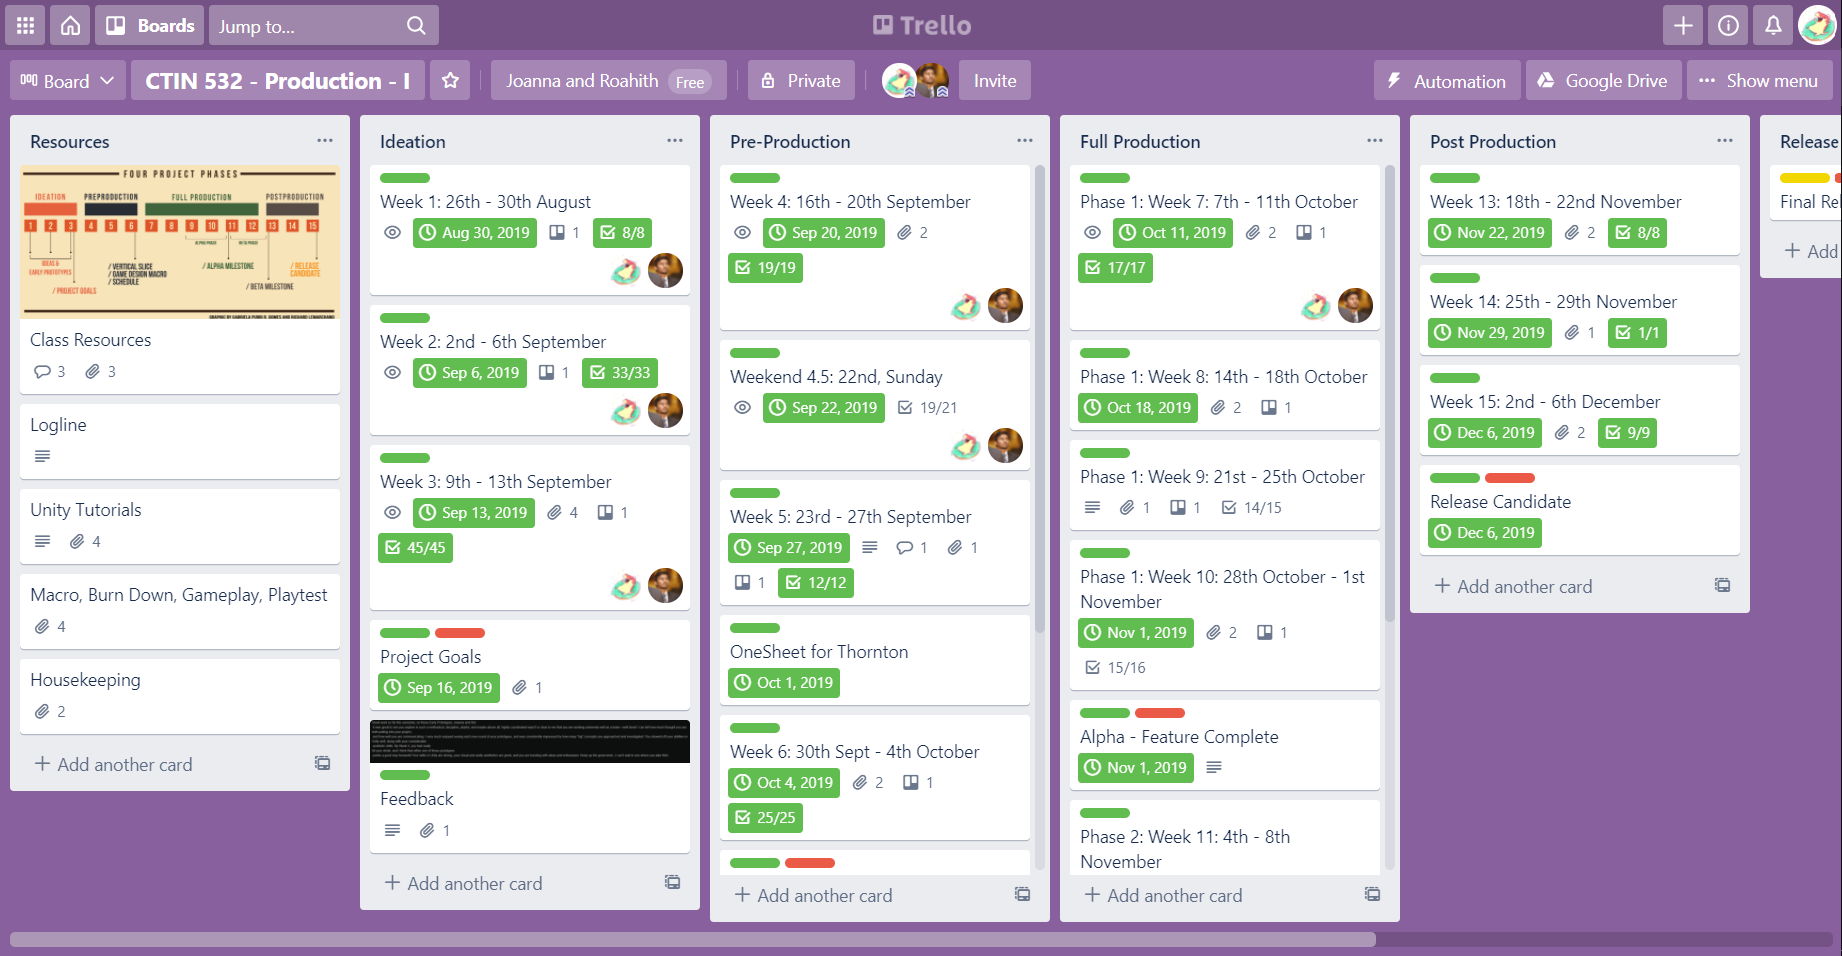  Trello Board to track tasks during Production phase. 